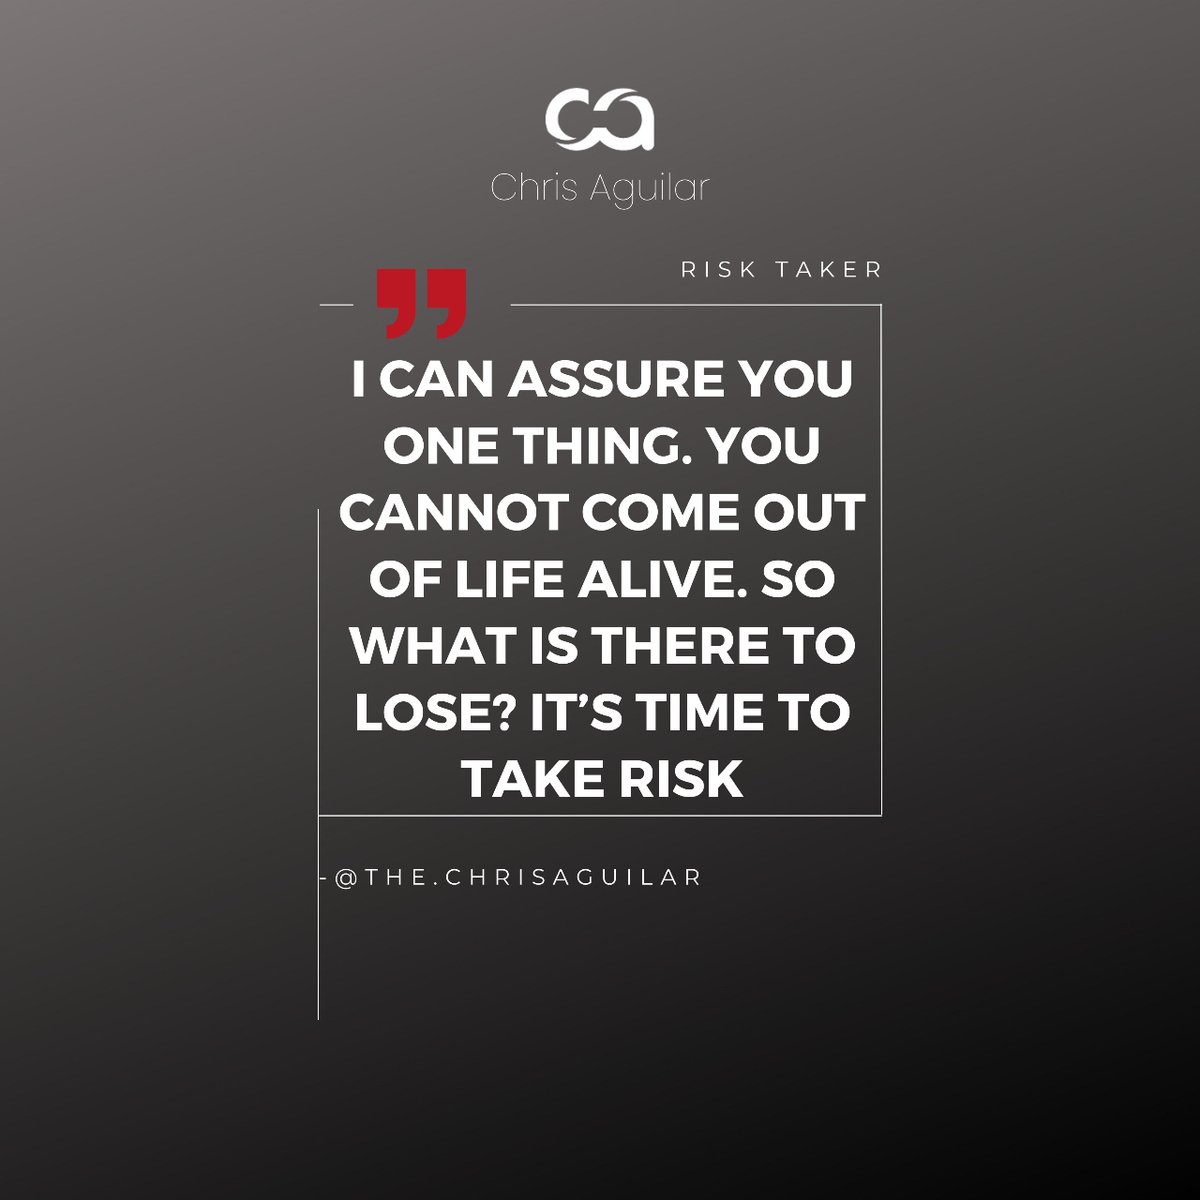 I can assure you one thing. You cannot come out of life alive. So what is there to lose? It's time to take risk. #thechrisaguilar #realestateinvesting #tcaacademy #fixandflip #investment #realestate #business #profits #successs #quote